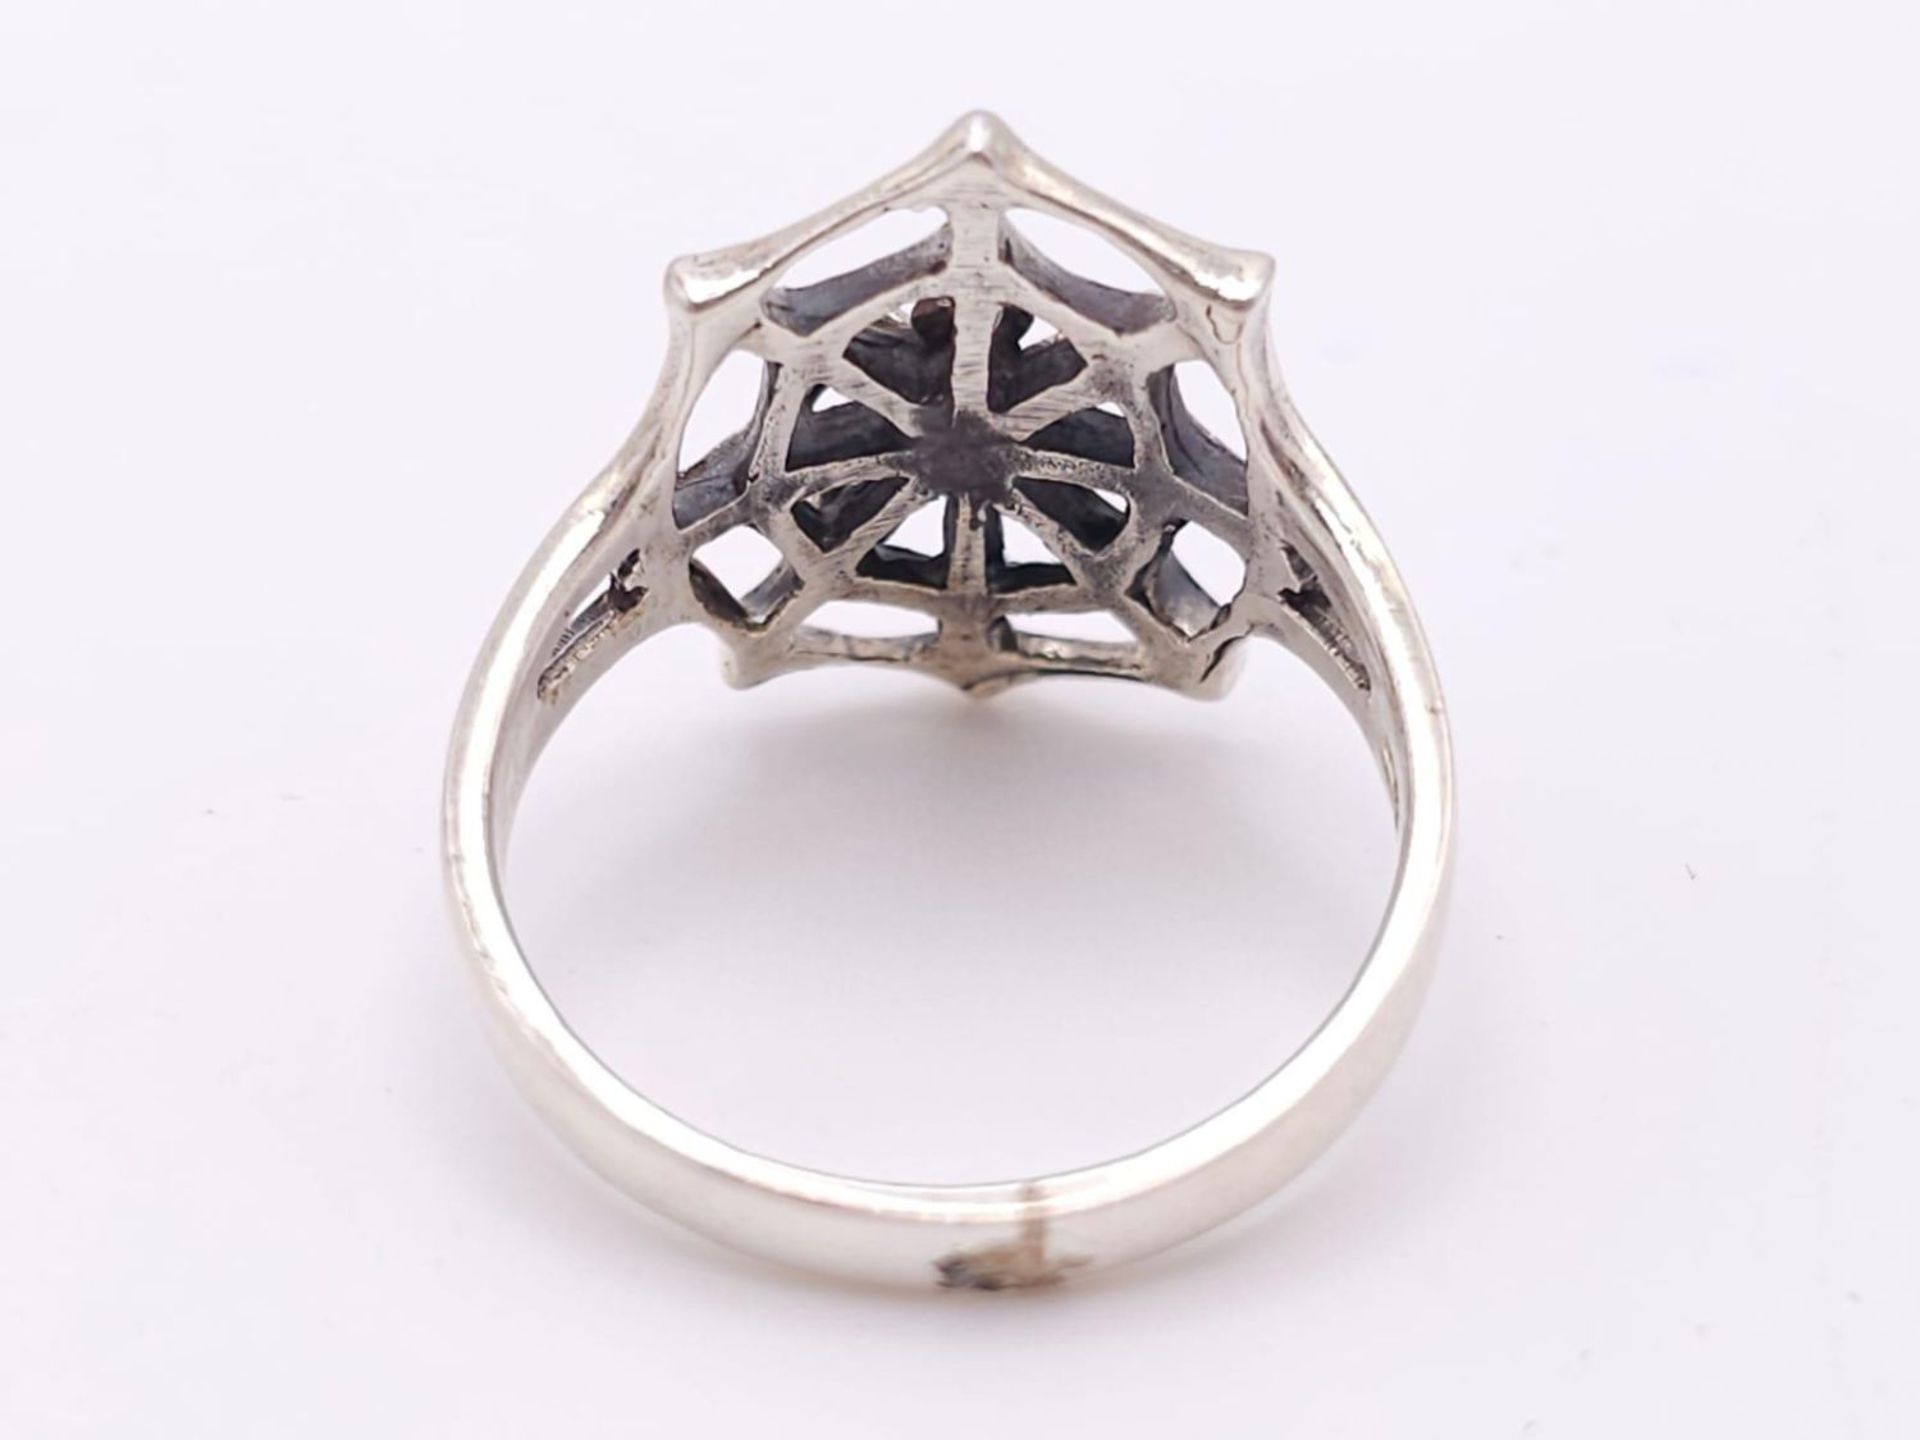 A Unique Vintage Sterling Silver Spider and Spider Web Ring Size Q. The Crown Measures 2cm Long - Image 9 of 10